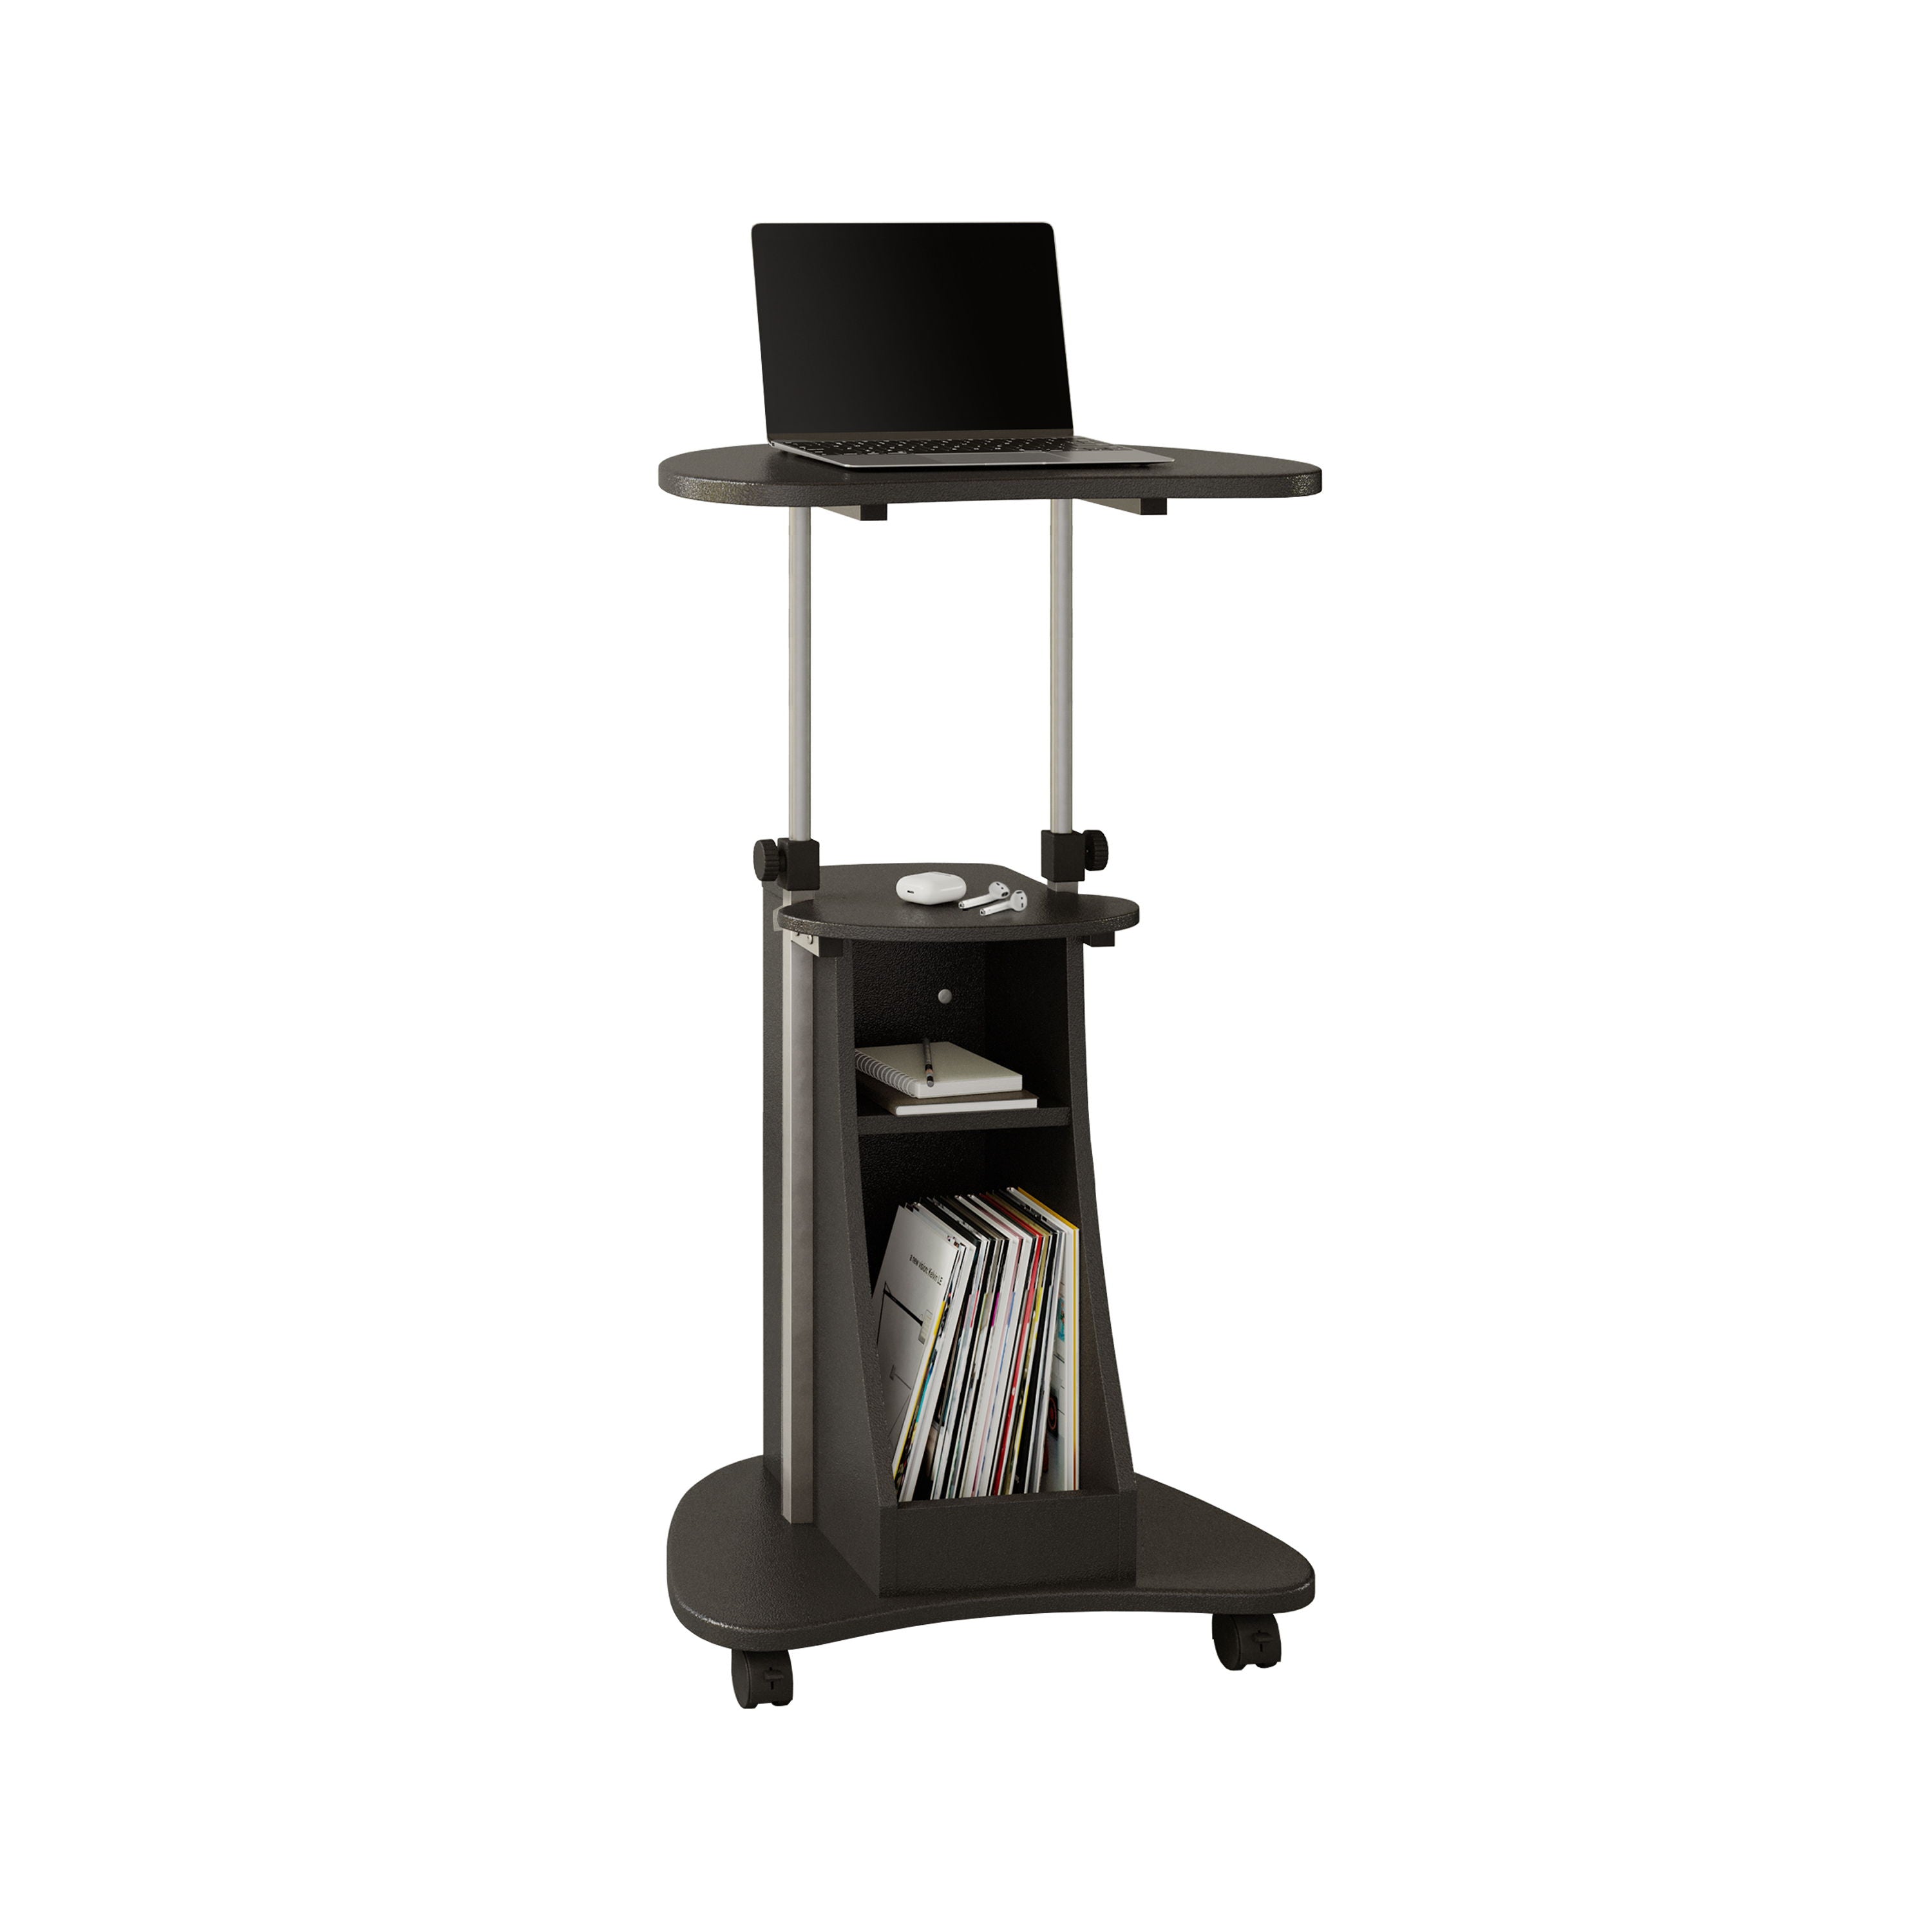 Techni Mobili Sit To Stand Rolling Adjustable Height Laptop Cart With Storage, Graphite